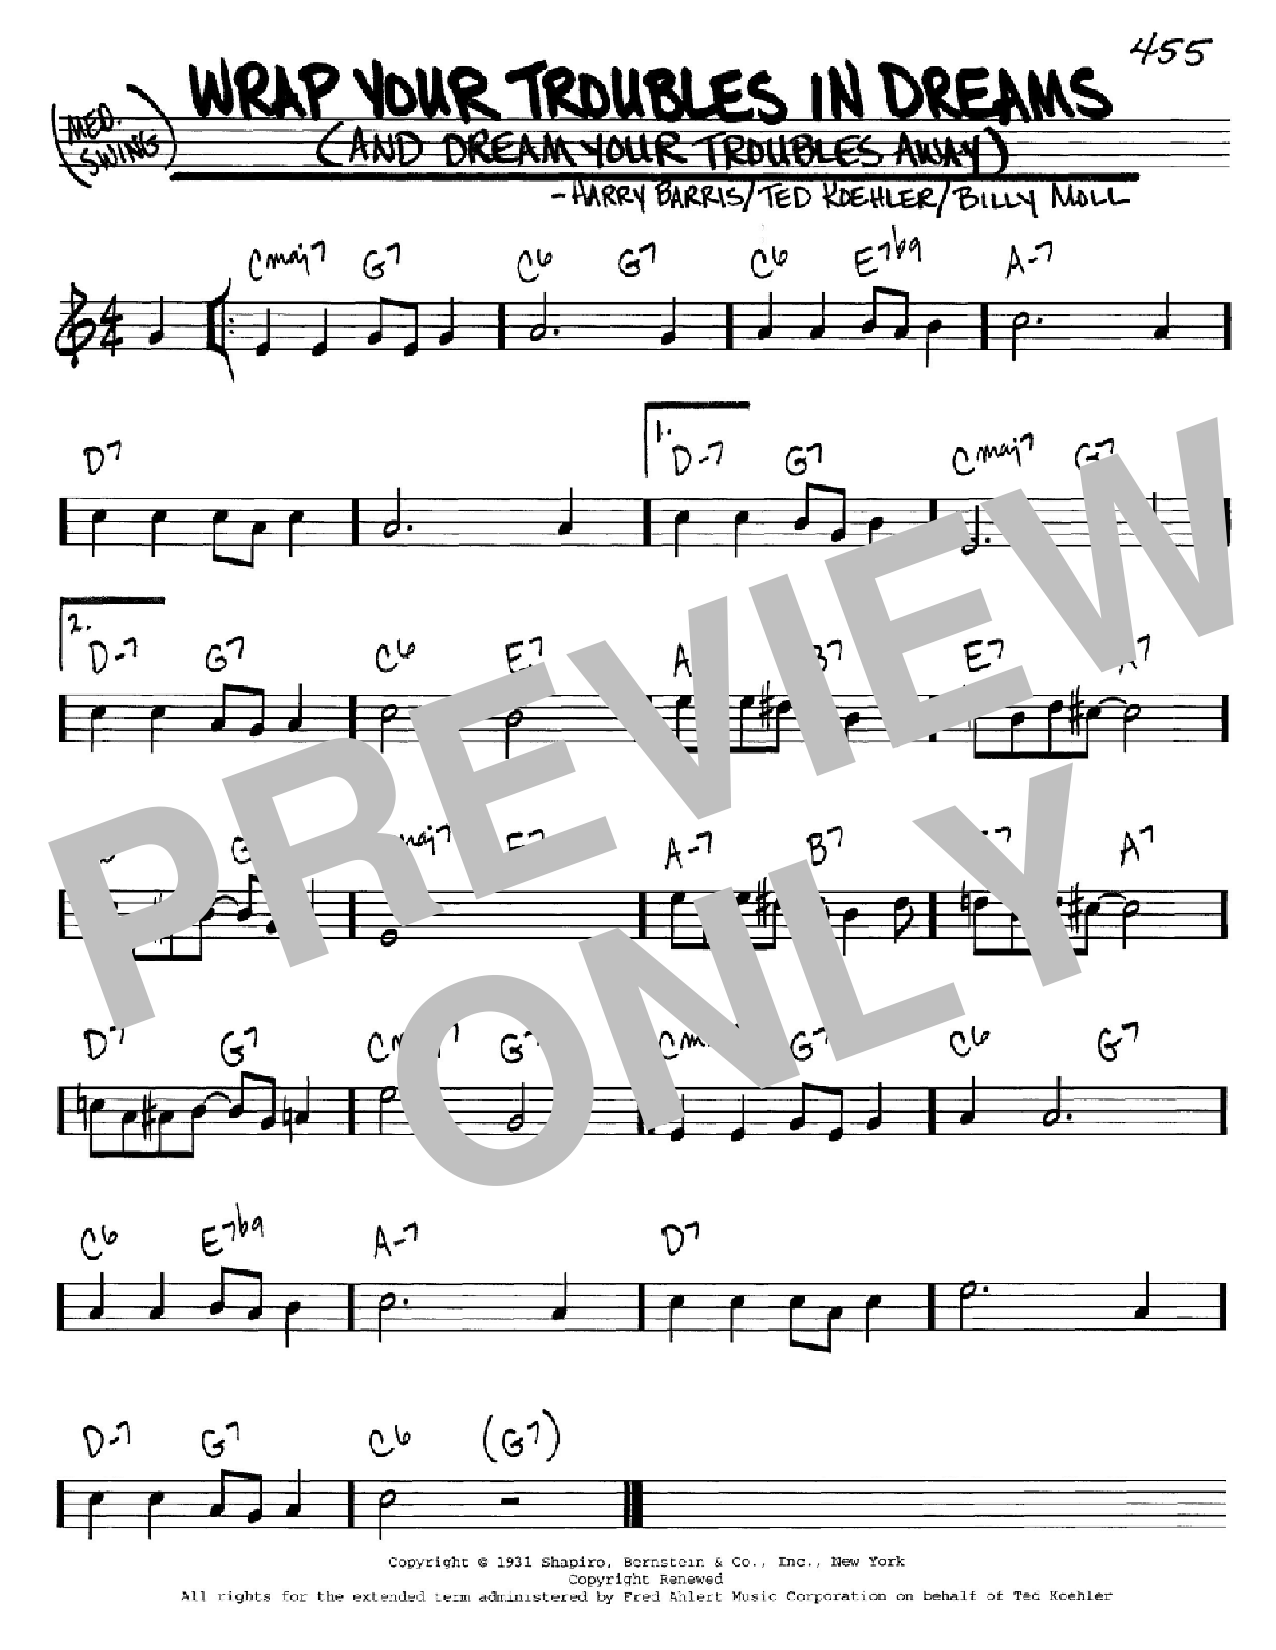 Ted Koehler Wrap Your Troubles In Dreams (And Dream Your Troubles Away) sheet music notes and chords. Download Printable PDF.